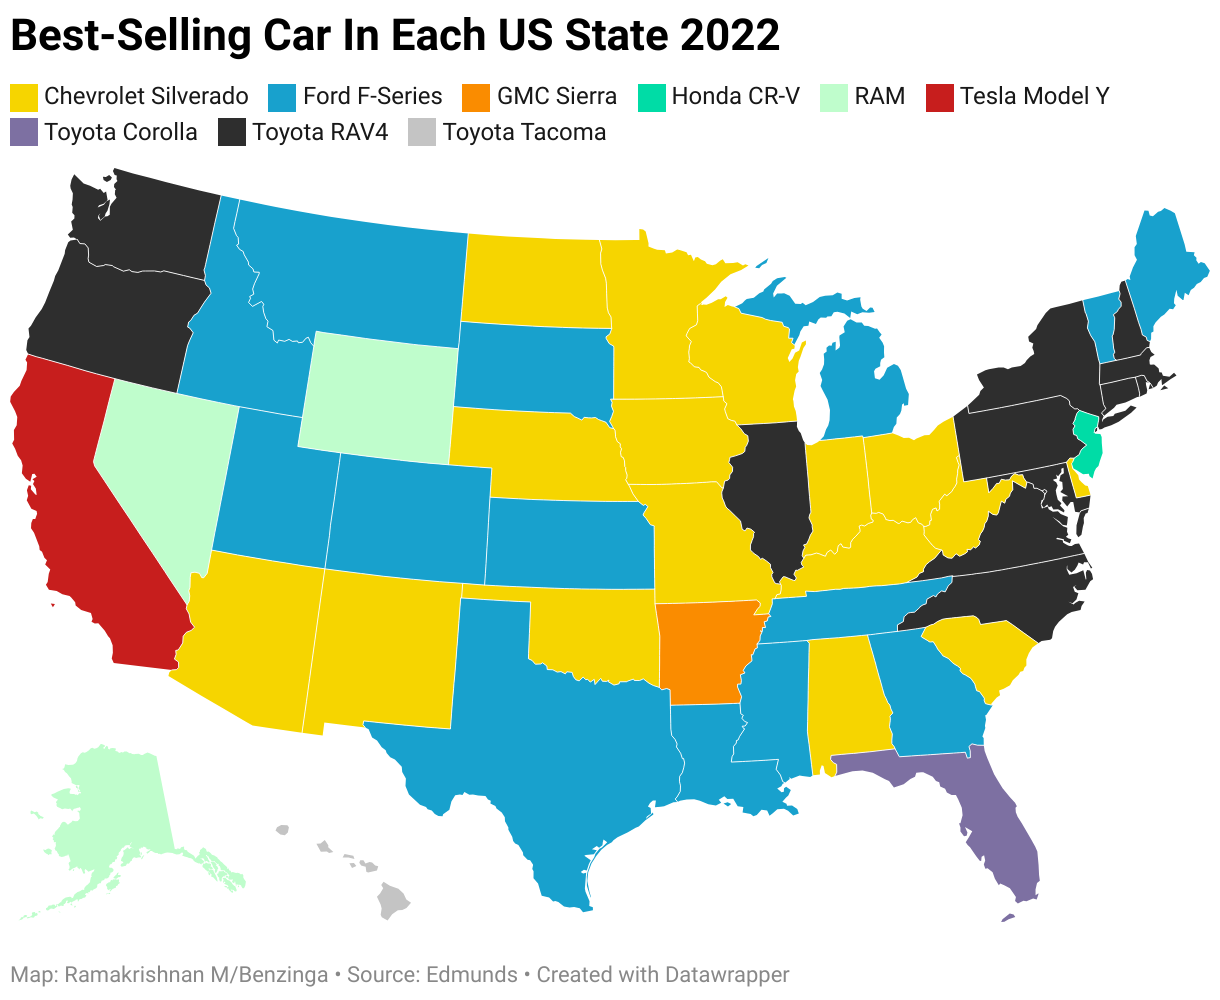 Best-Selling Car In Each US State 2022